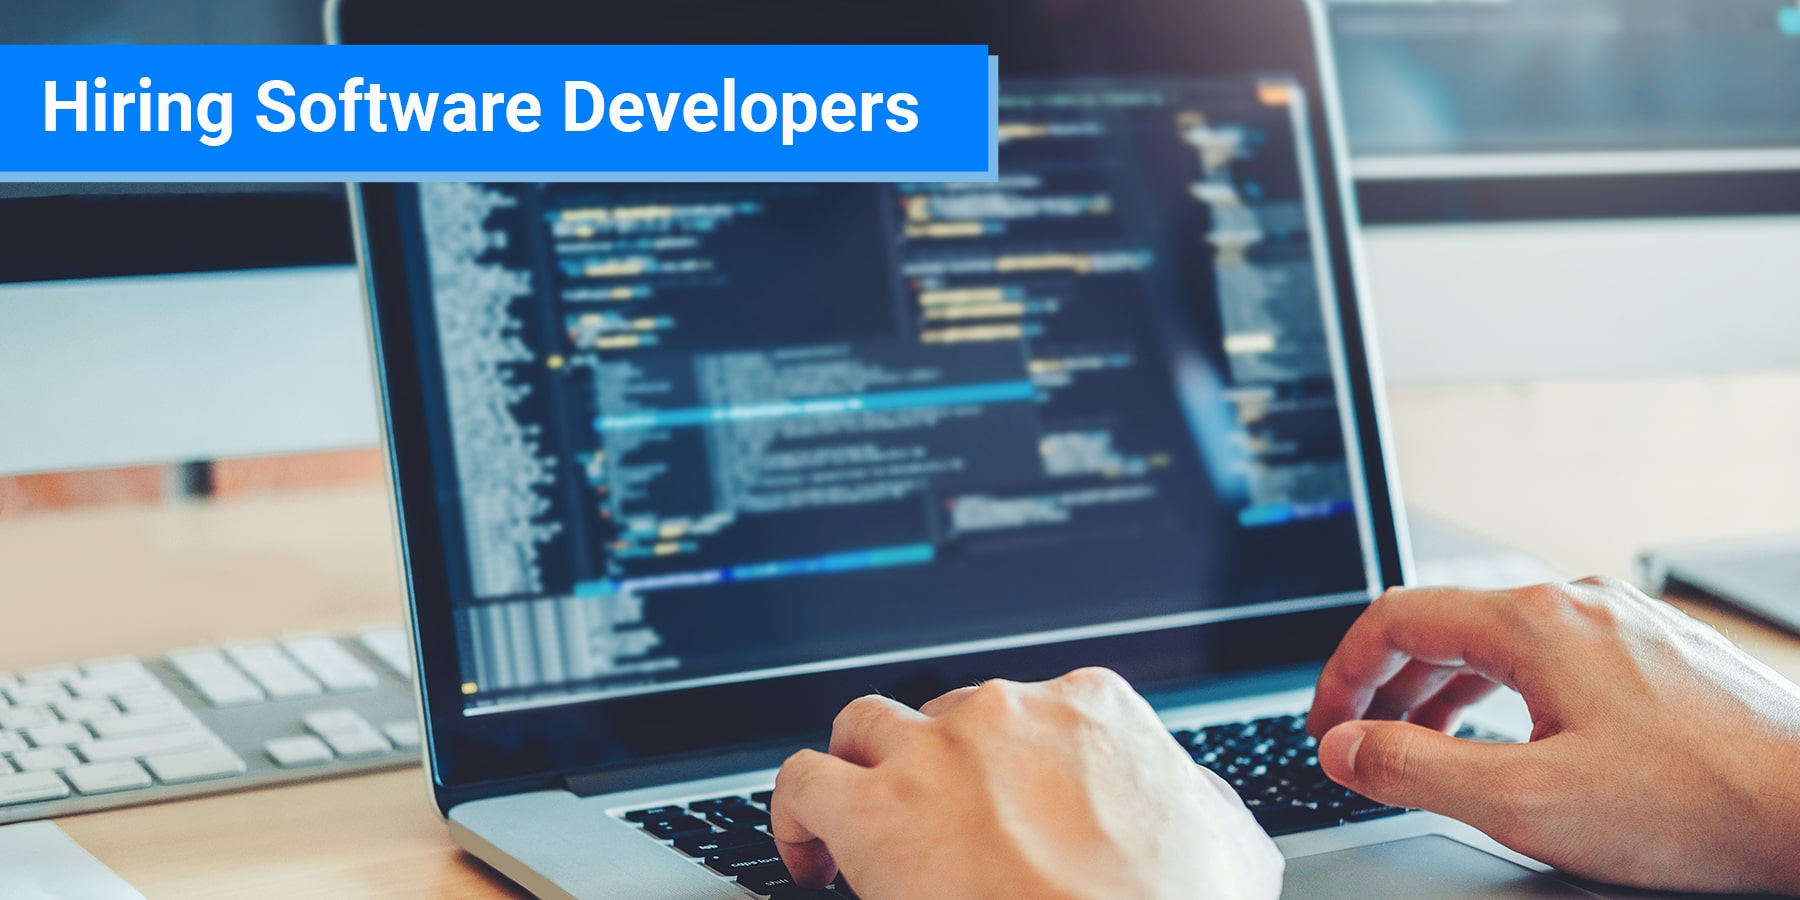 Hiring Software Developers: Tips on How To Find The Right Talent